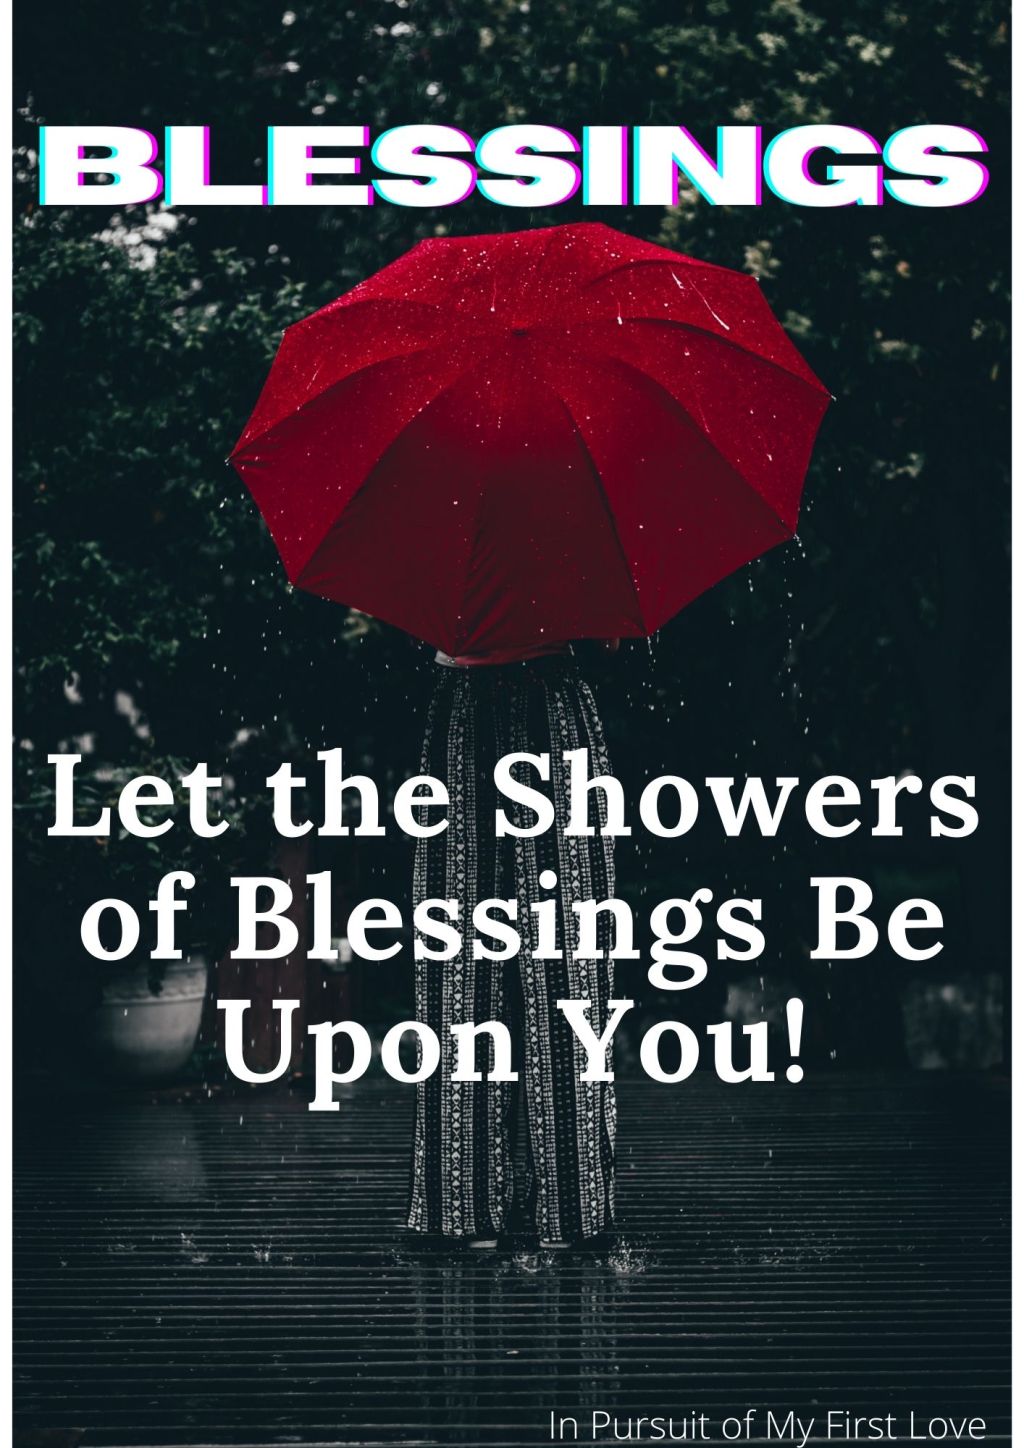 Let the Showers of Blessings Be Upon You!